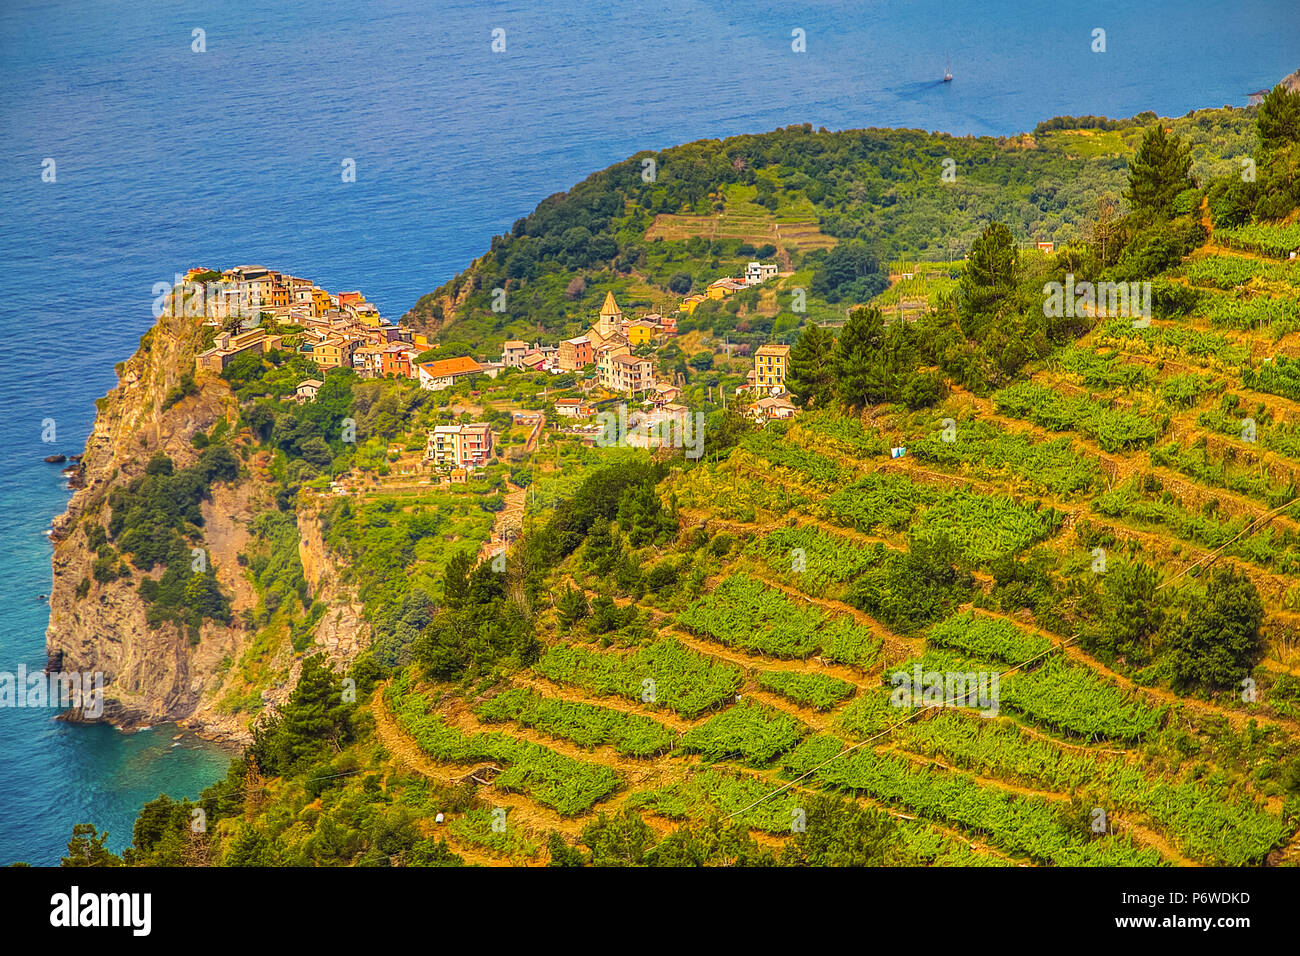 vineyard terraces overlooking the sea and ancient village Stock Photo